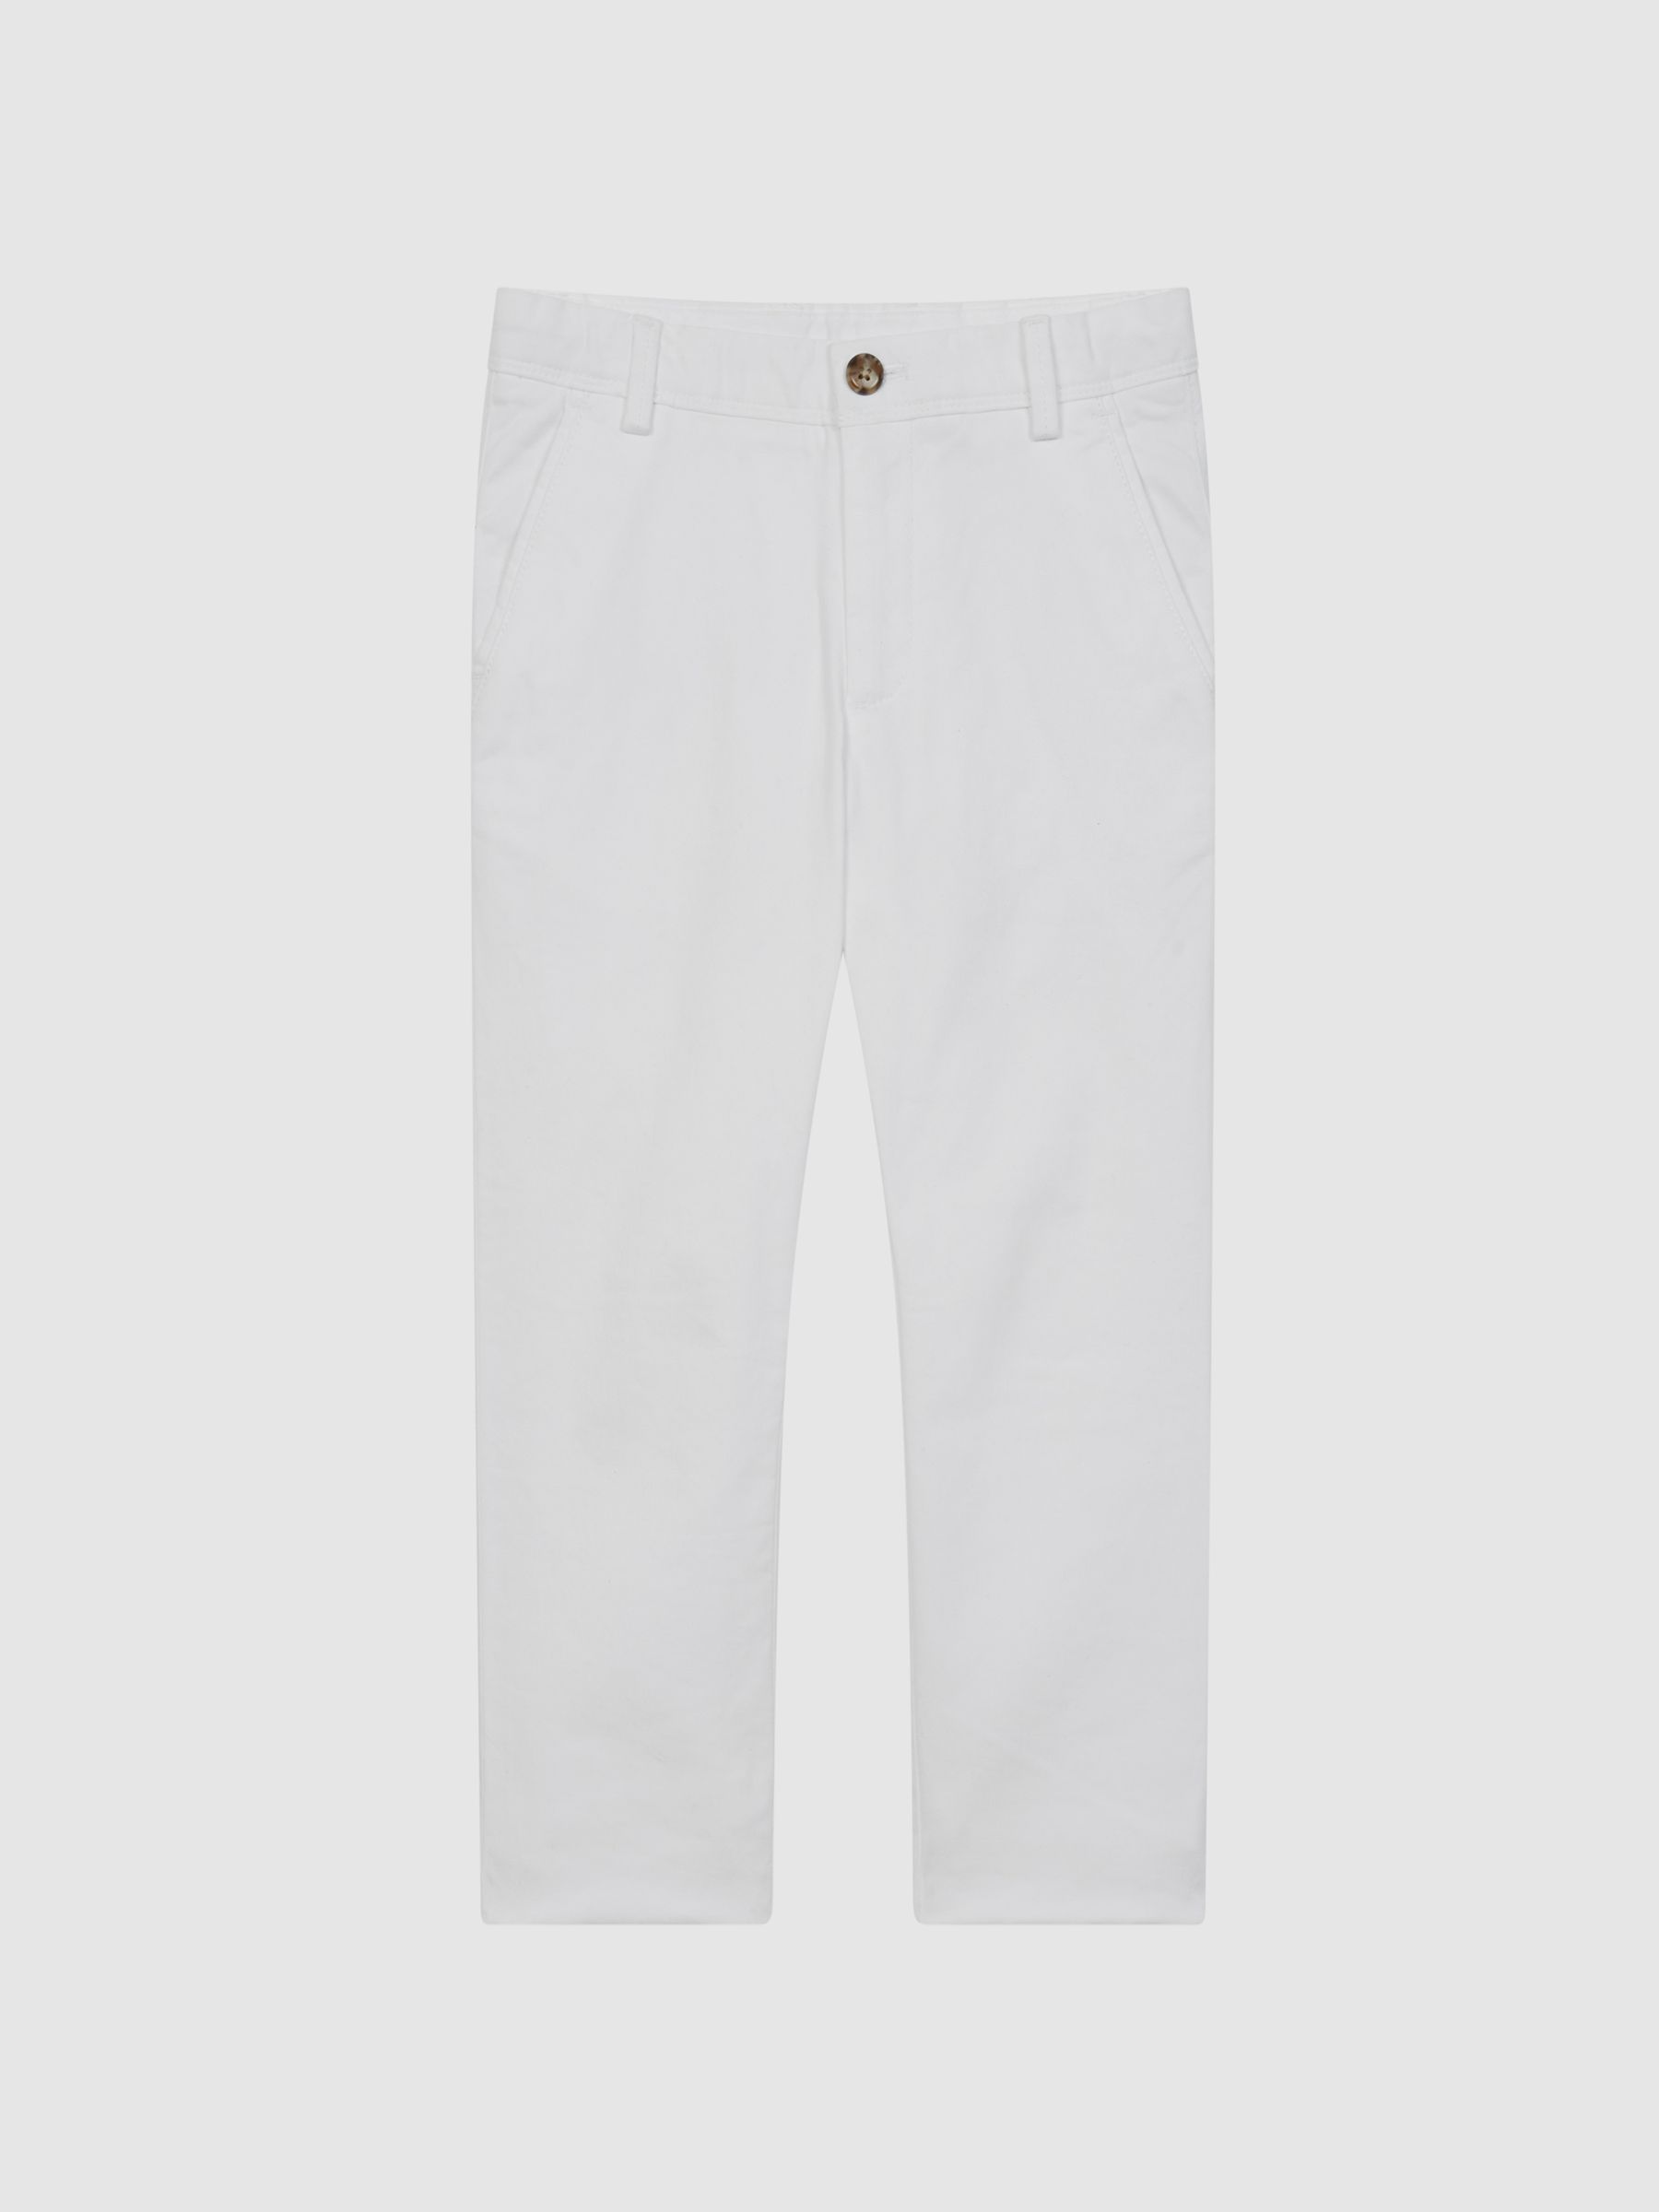 Reiss Pitch Junior Slim Fit Casual Chinos | REISS USA